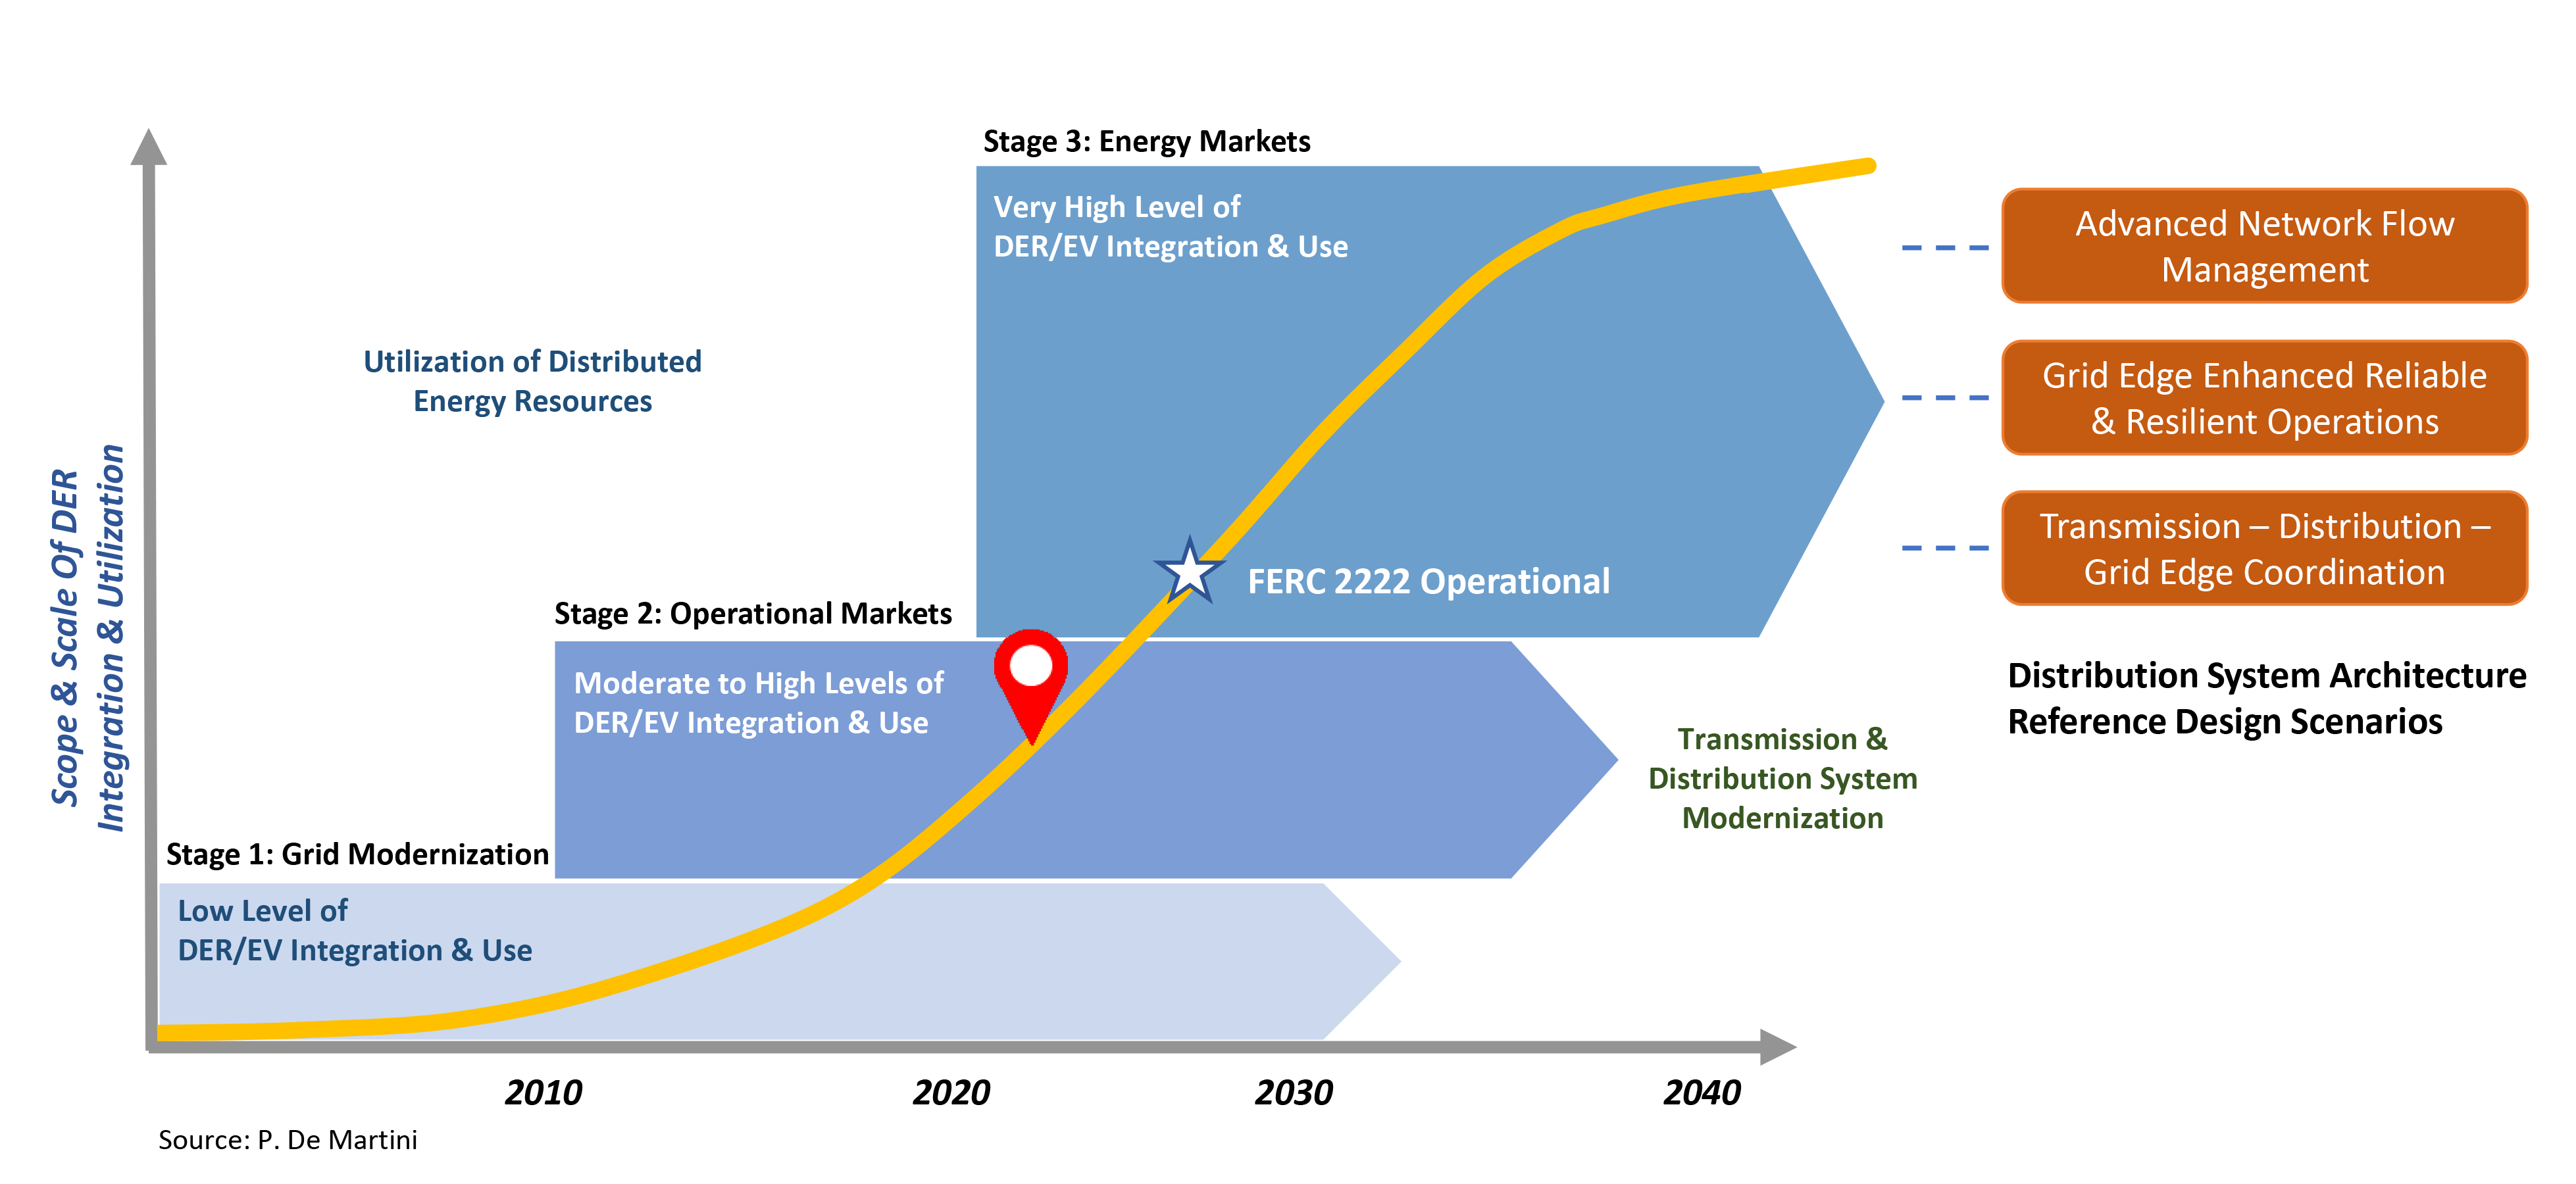 S-curve graph showing the optimal scope and scale of integration and use of distributed energy resources from the year 2000 through the year 2040, showing that we are at the middle of the S-curve in 2023.